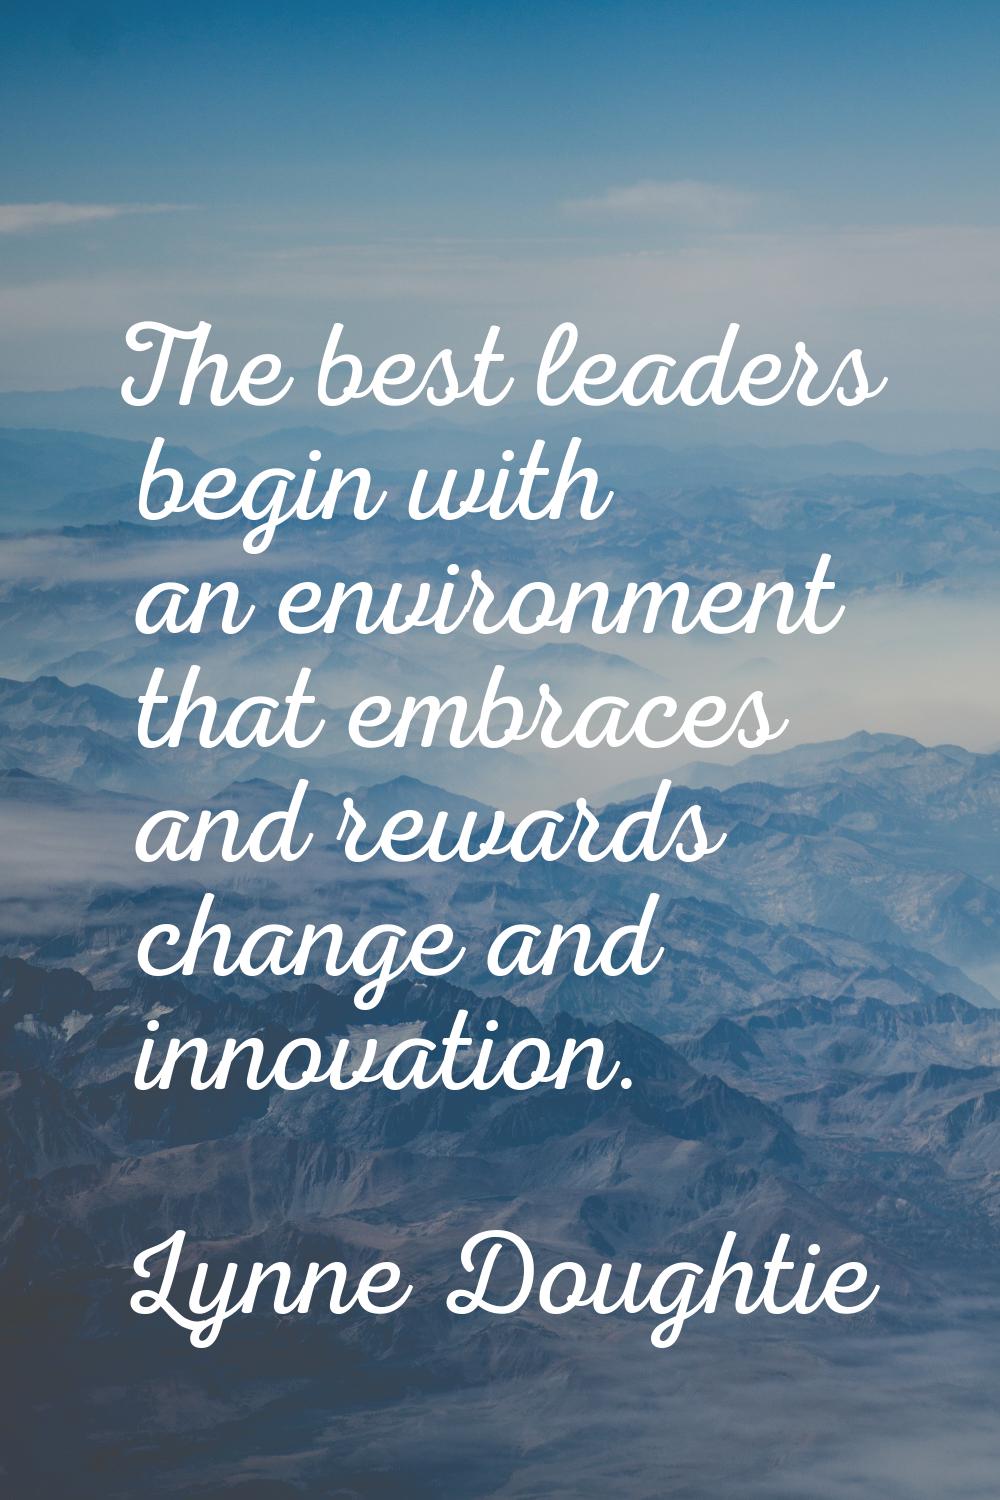 The best leaders begin with an environment that embraces and rewards change and innovation.